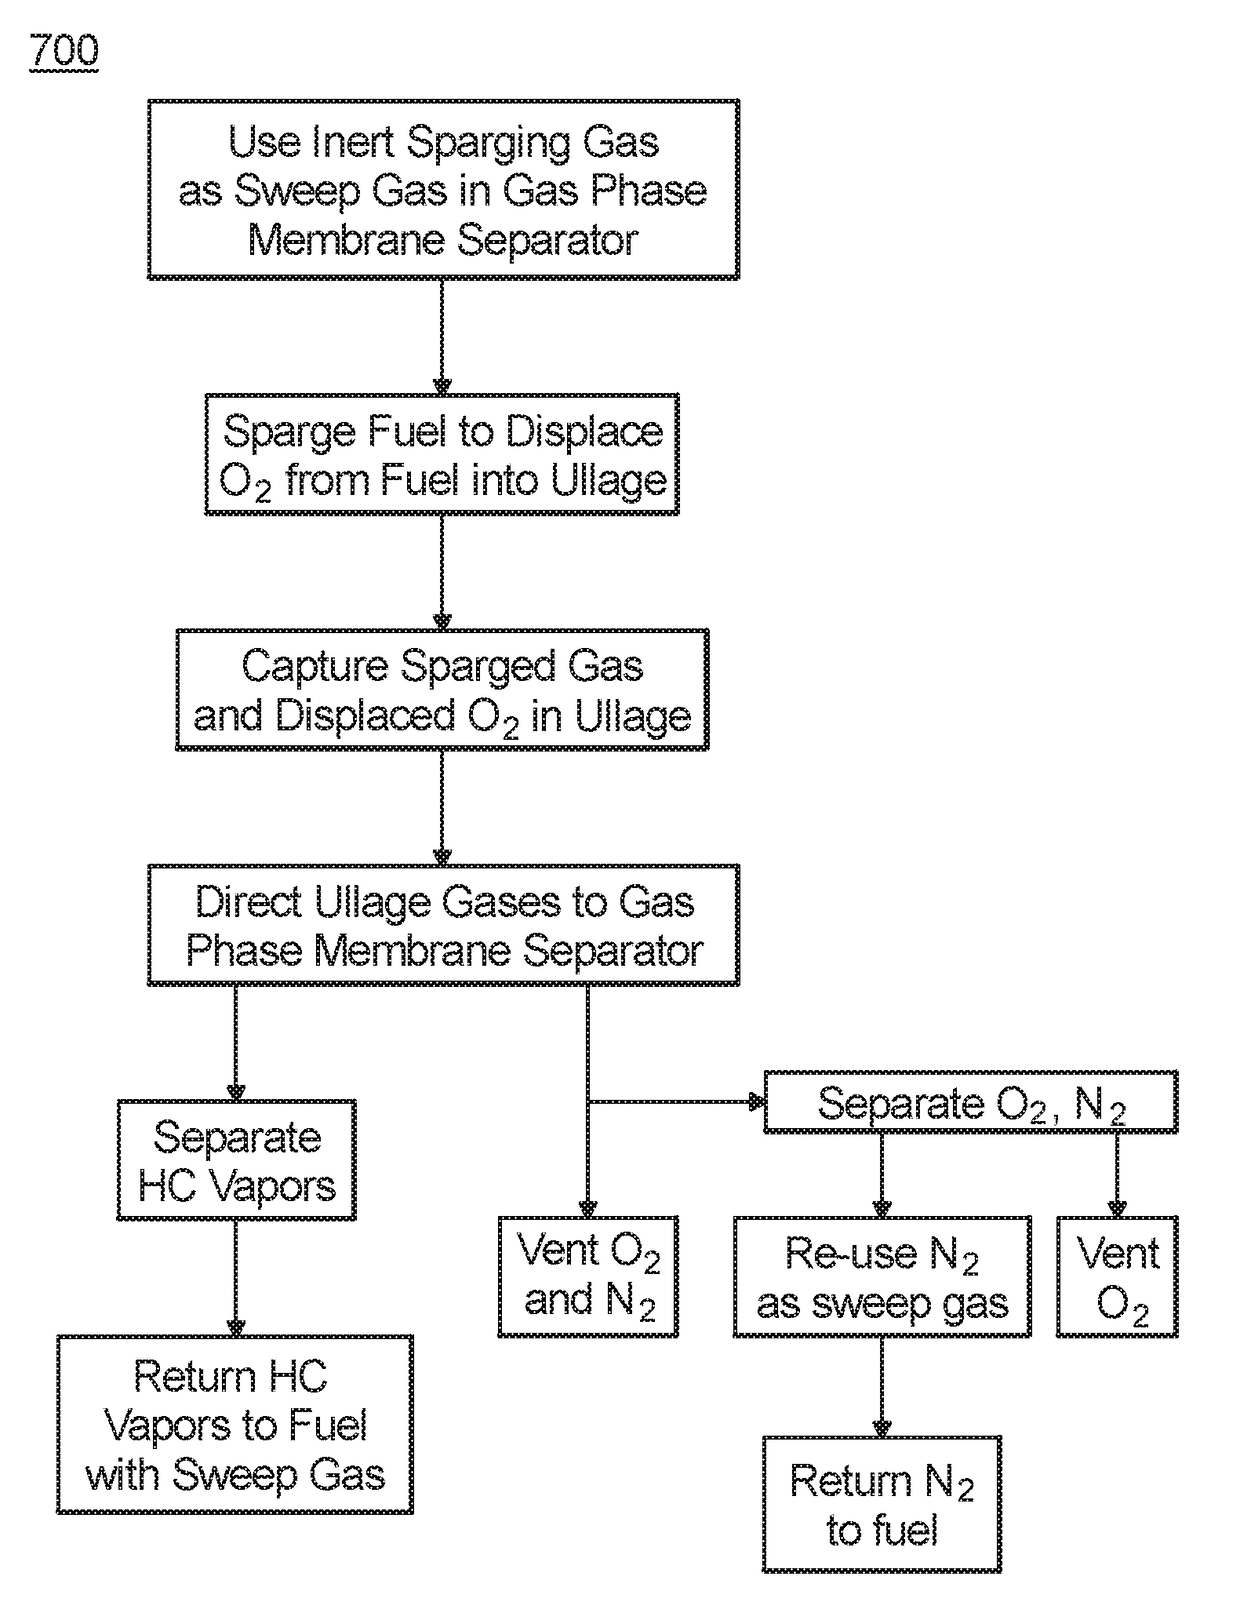 Fuel deoxygenation systems